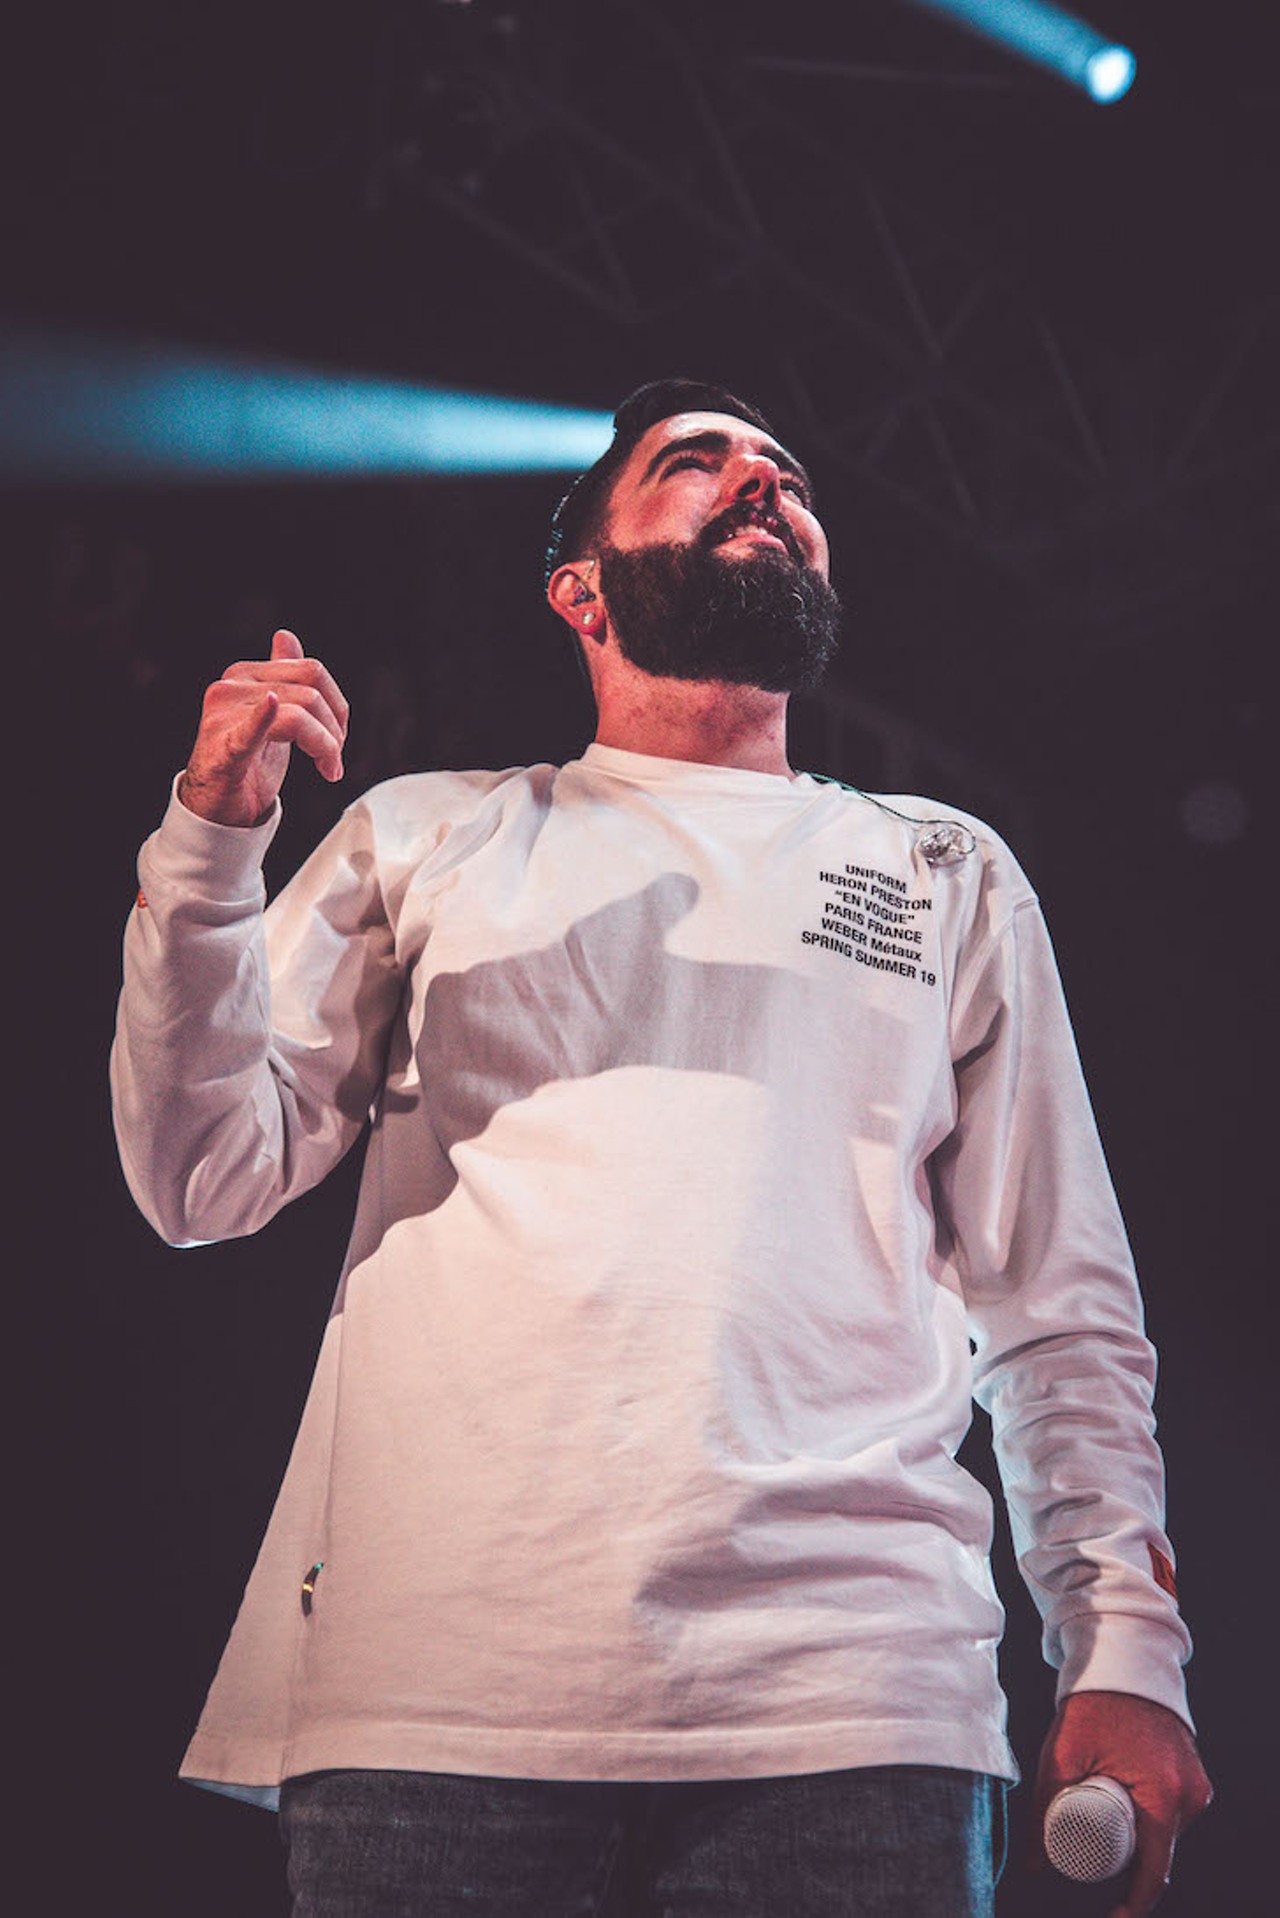 Photos from A Day to Remember and Underoath at House of Blues